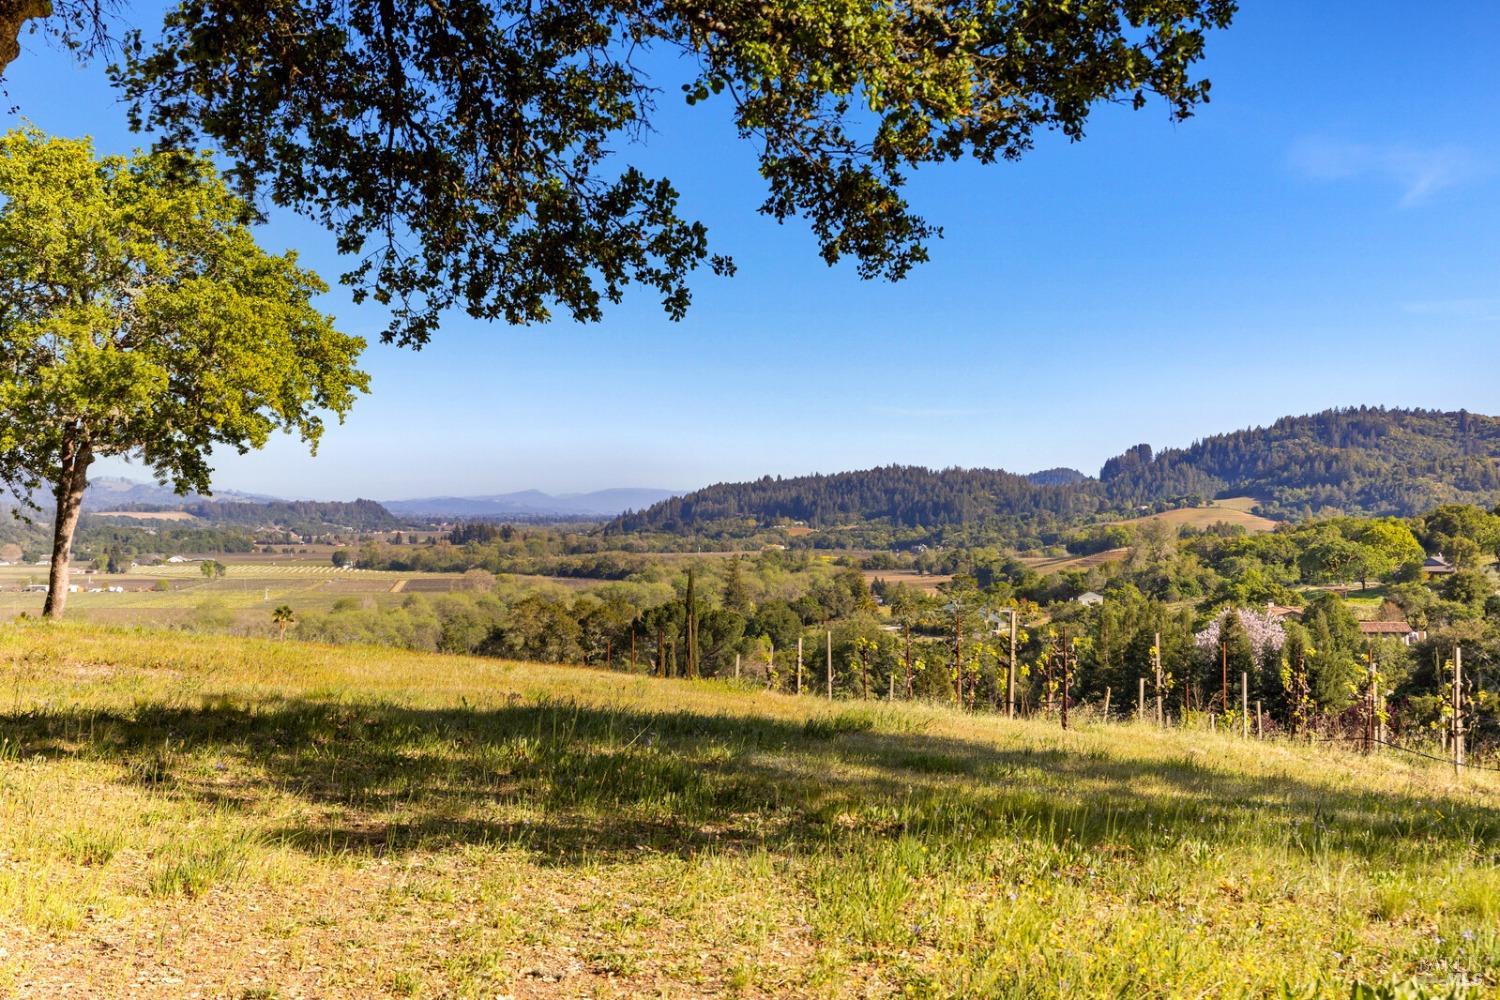 Wine Country Estate building site in prestigious Dry Creek Valley! This very private home-site with stunning 360 degree panoramic valley views  sits on over 10.50+/- acres with 8 acres +/- of premium Award Winning Zinfandel Sawyer vines (97 points double gold 2017, double gold) in  Just minutes to downtown Healdsburg, Lake Sonoma and Dry Creek General Store.  Cycle enthusiasts worldwide dream of beginning their adventures from here to nearby wineries, tasting rooms and farm to table restaurants. Seller will provide potential buyers with five years fruit purchase contact and vineyard maintenance contract.